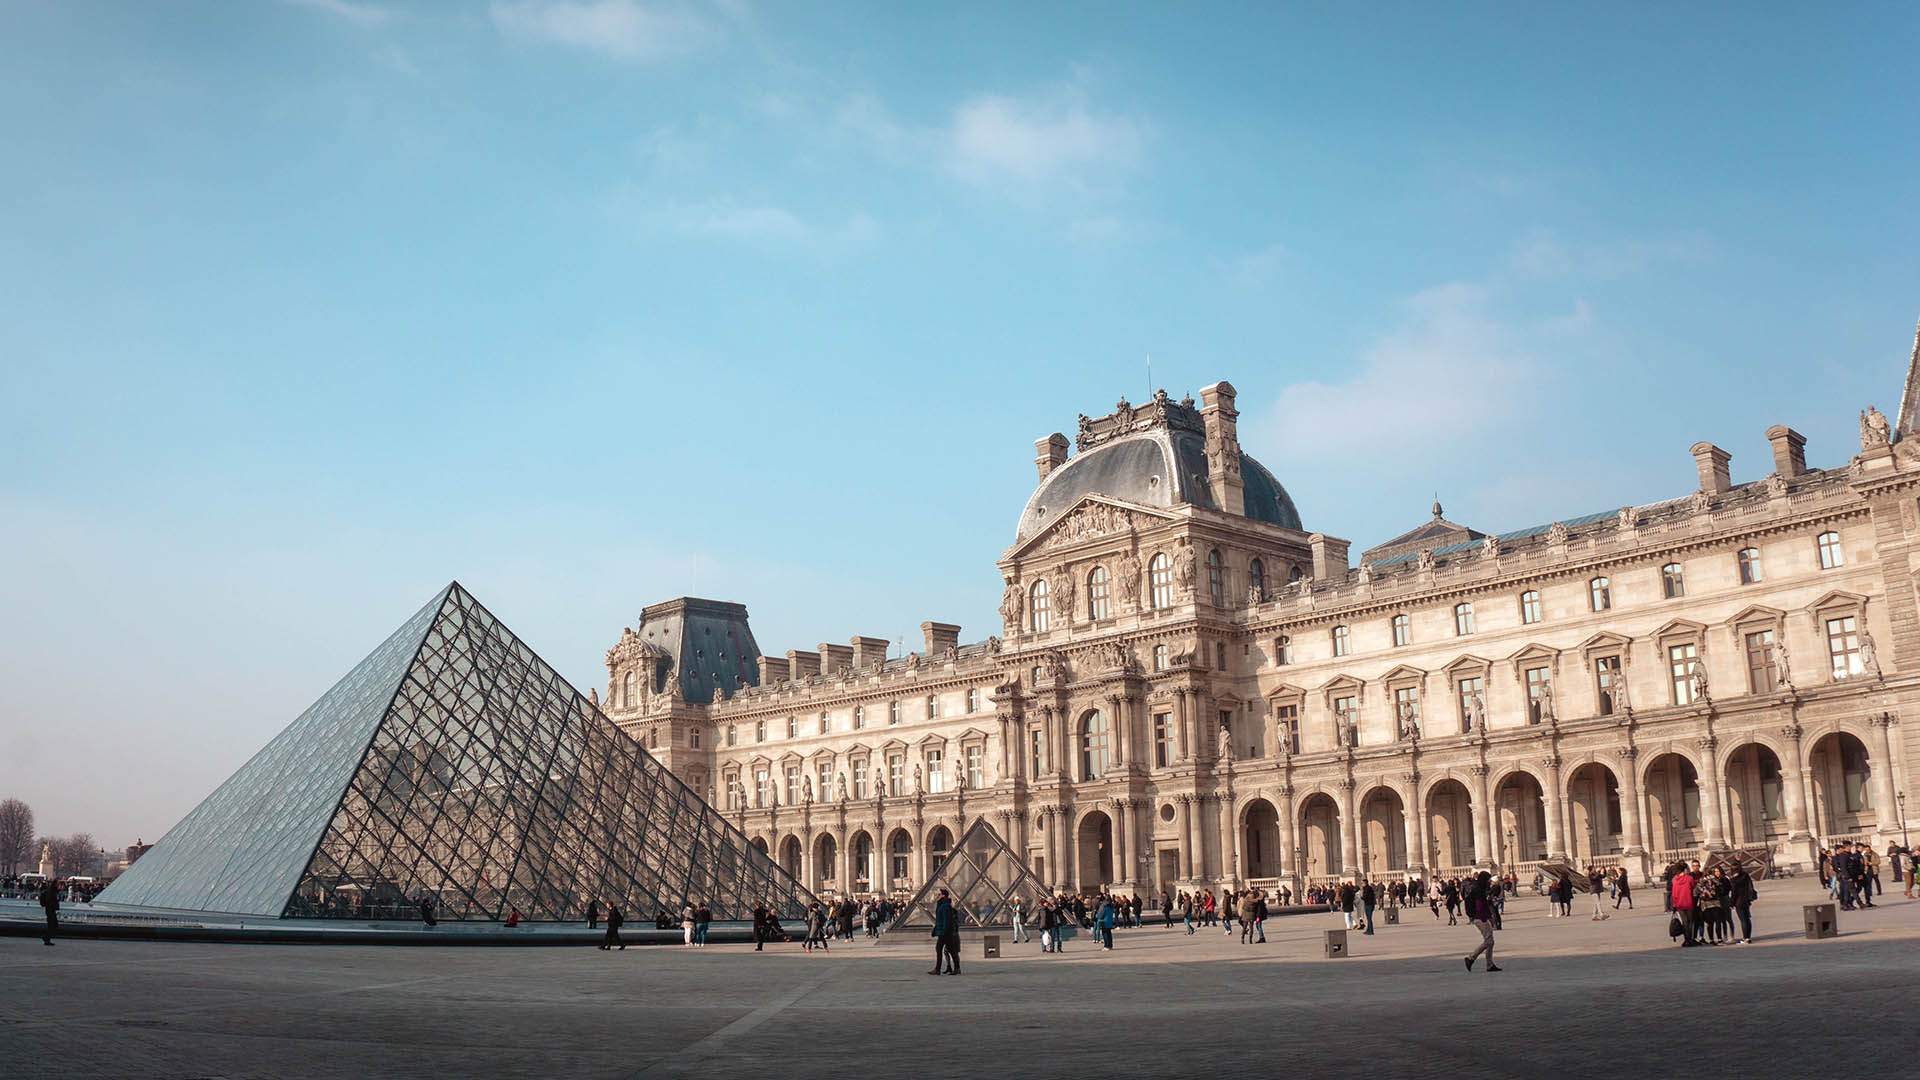 The Louvre Museum creates new fragrances inspired by art